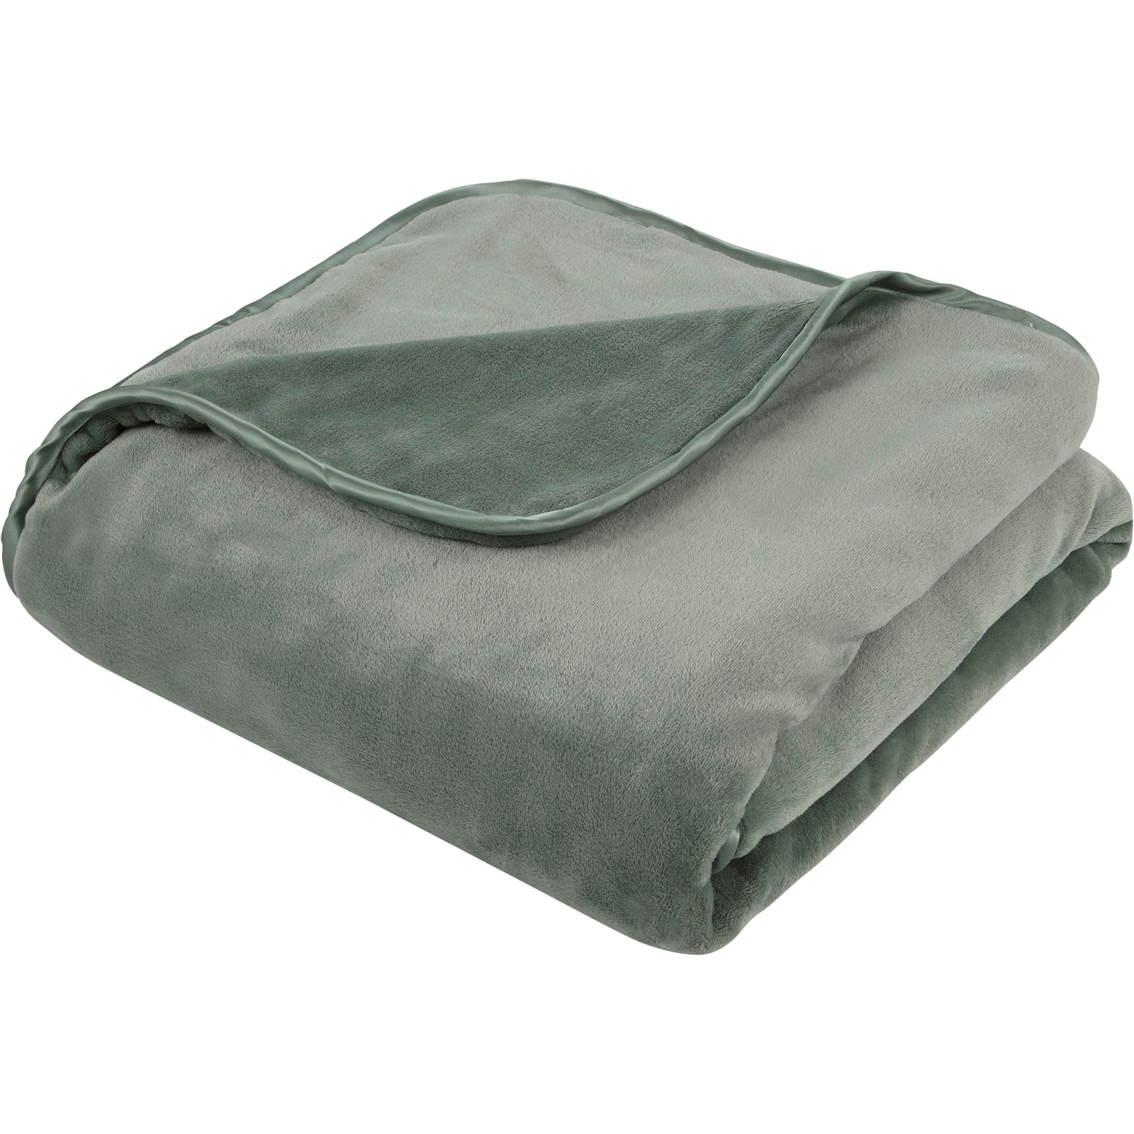 Vellux 15 Lb. Weighted Throw | Blankets & Bedding Accessories | Back To